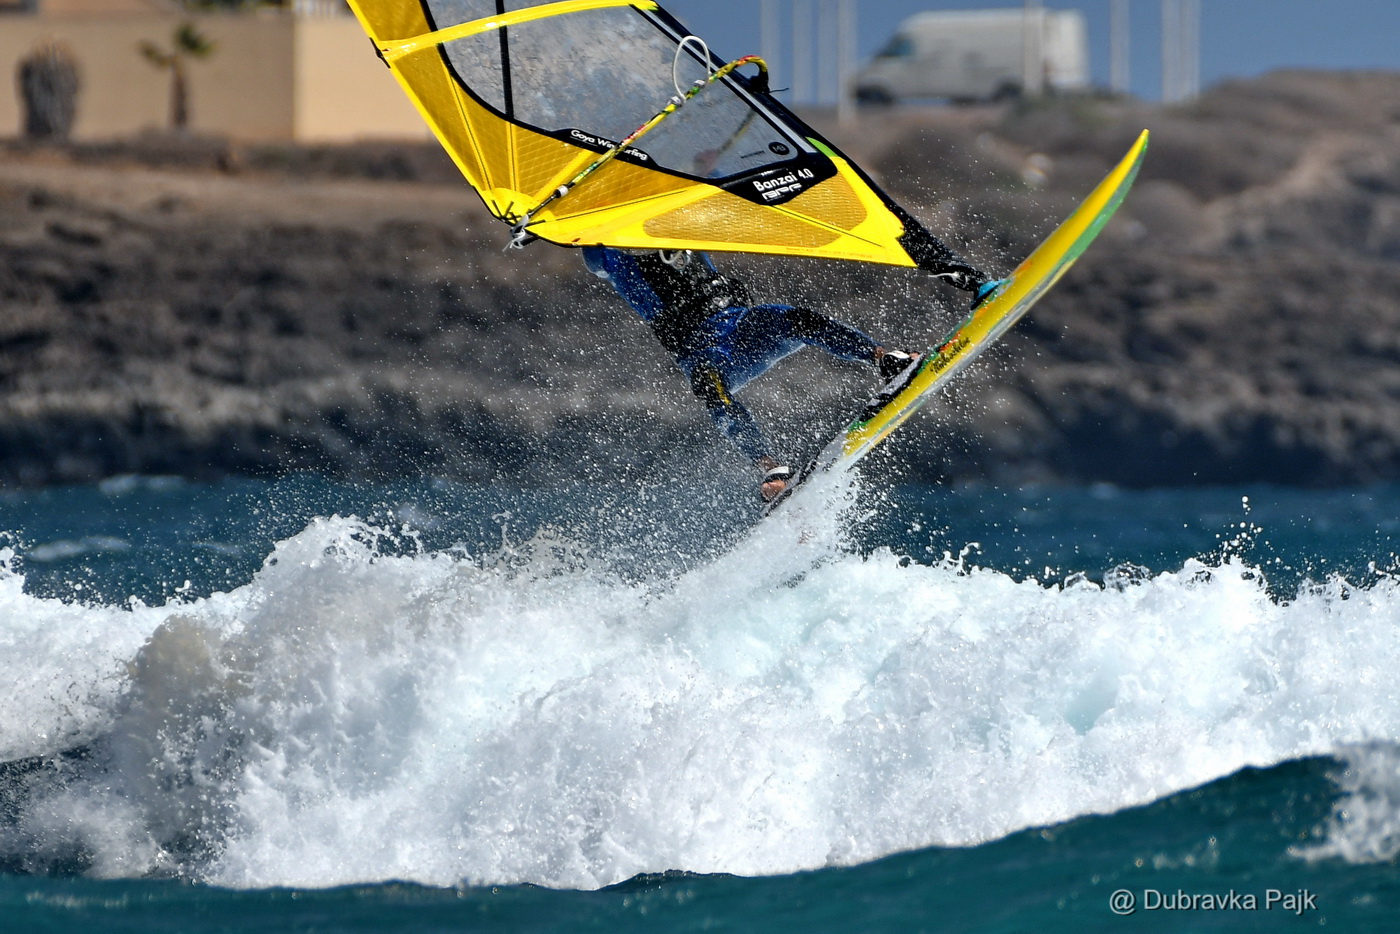 Absolutely love windsurfing